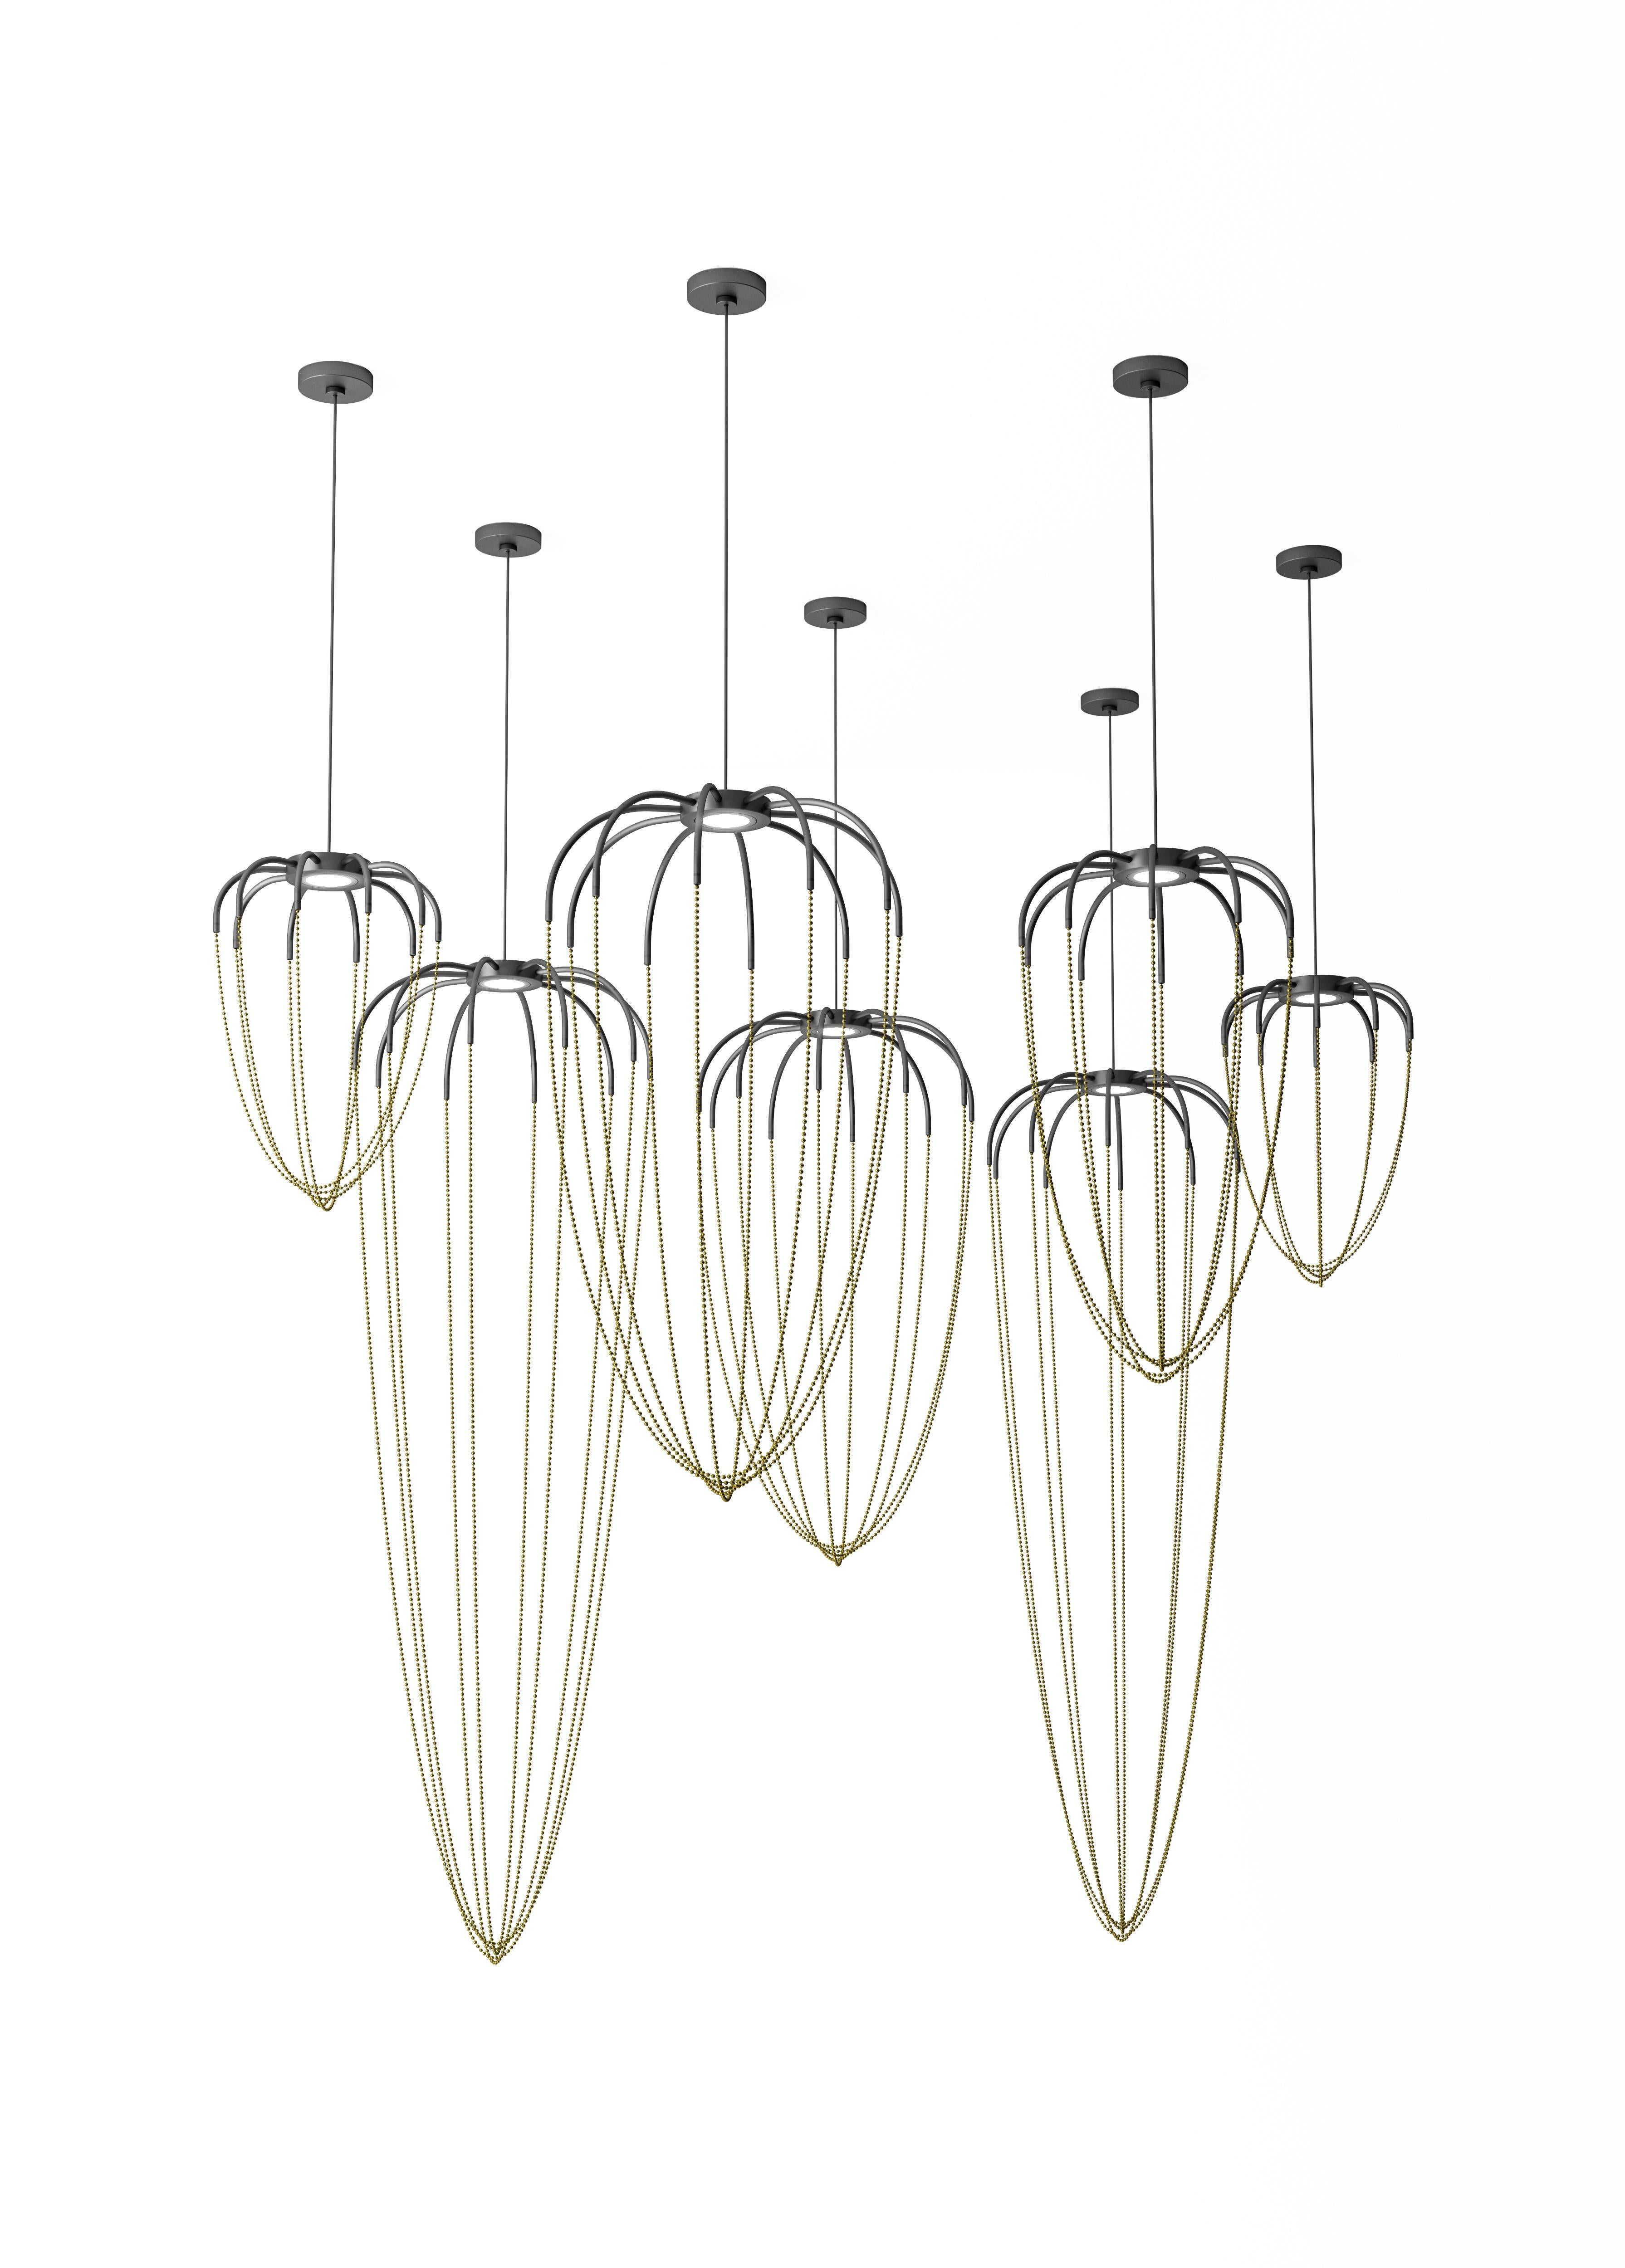 Painted Axolight Alysoid Medium Pendant Lamp in Anthracite Grey with Brass Chains For Sale